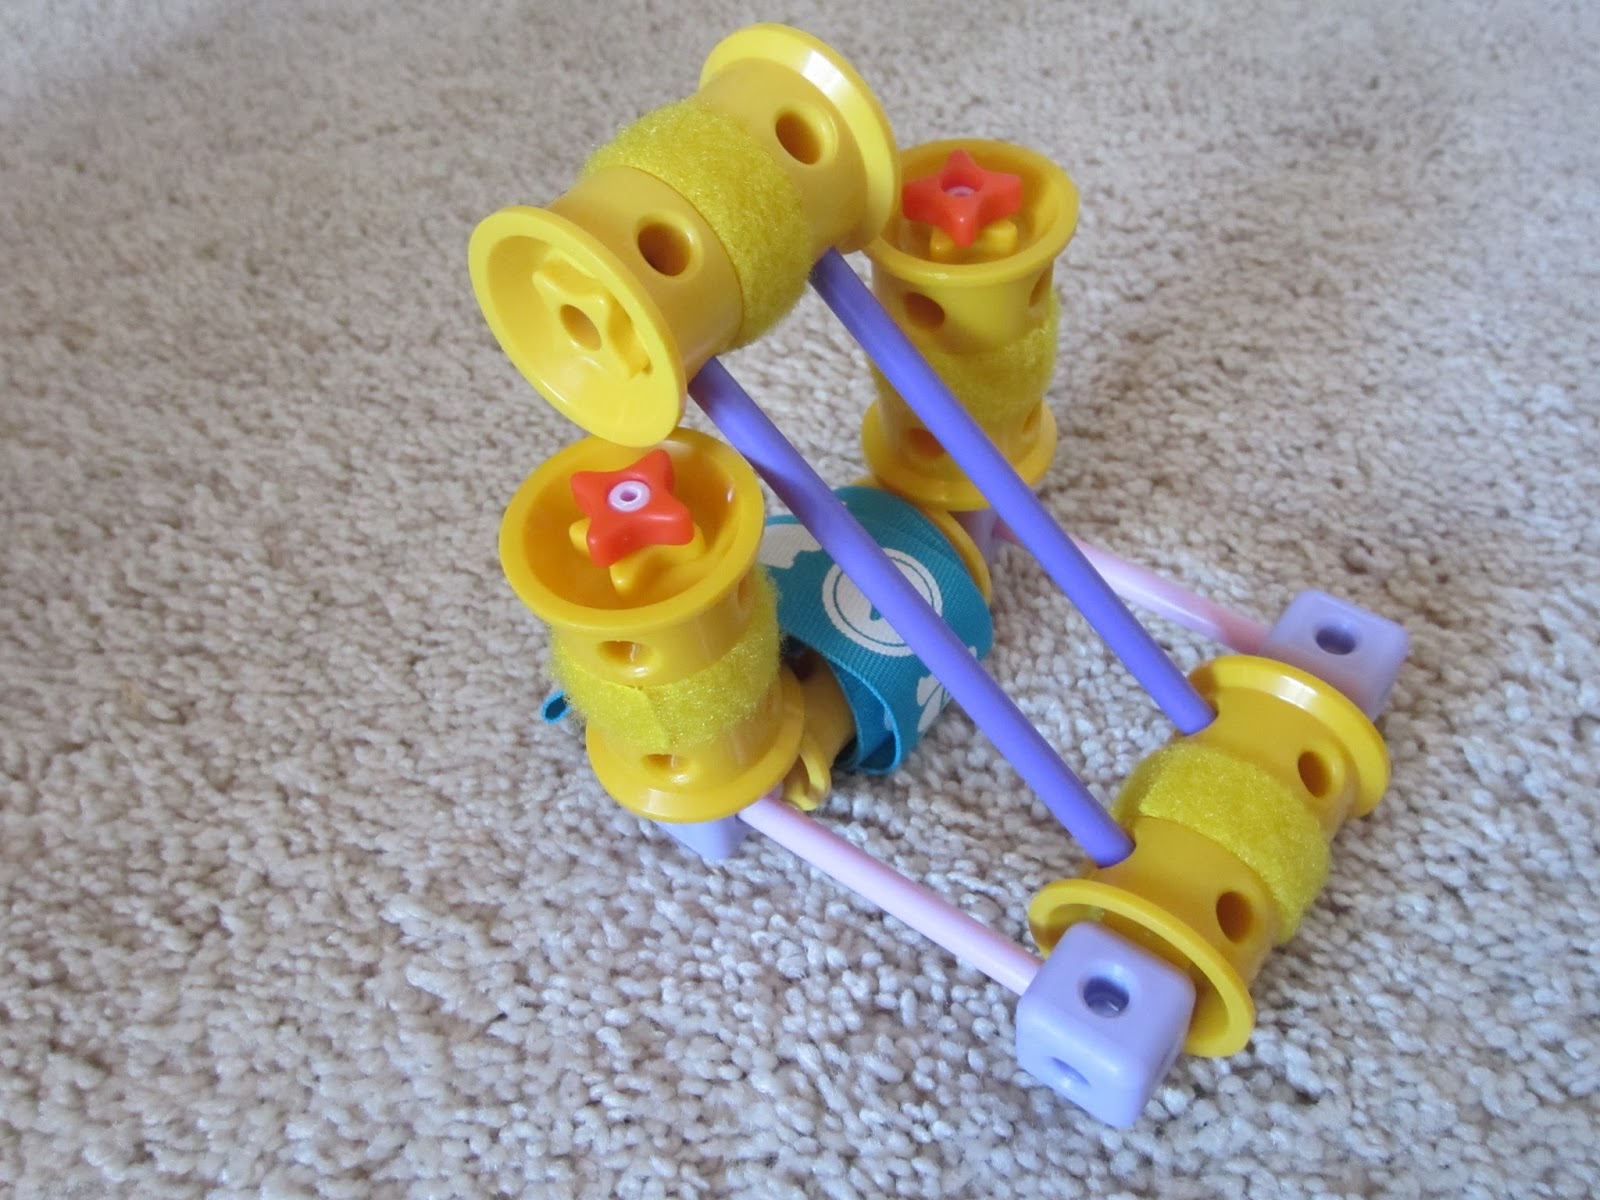 Goldie Blox Invention: A Girls Building Toy